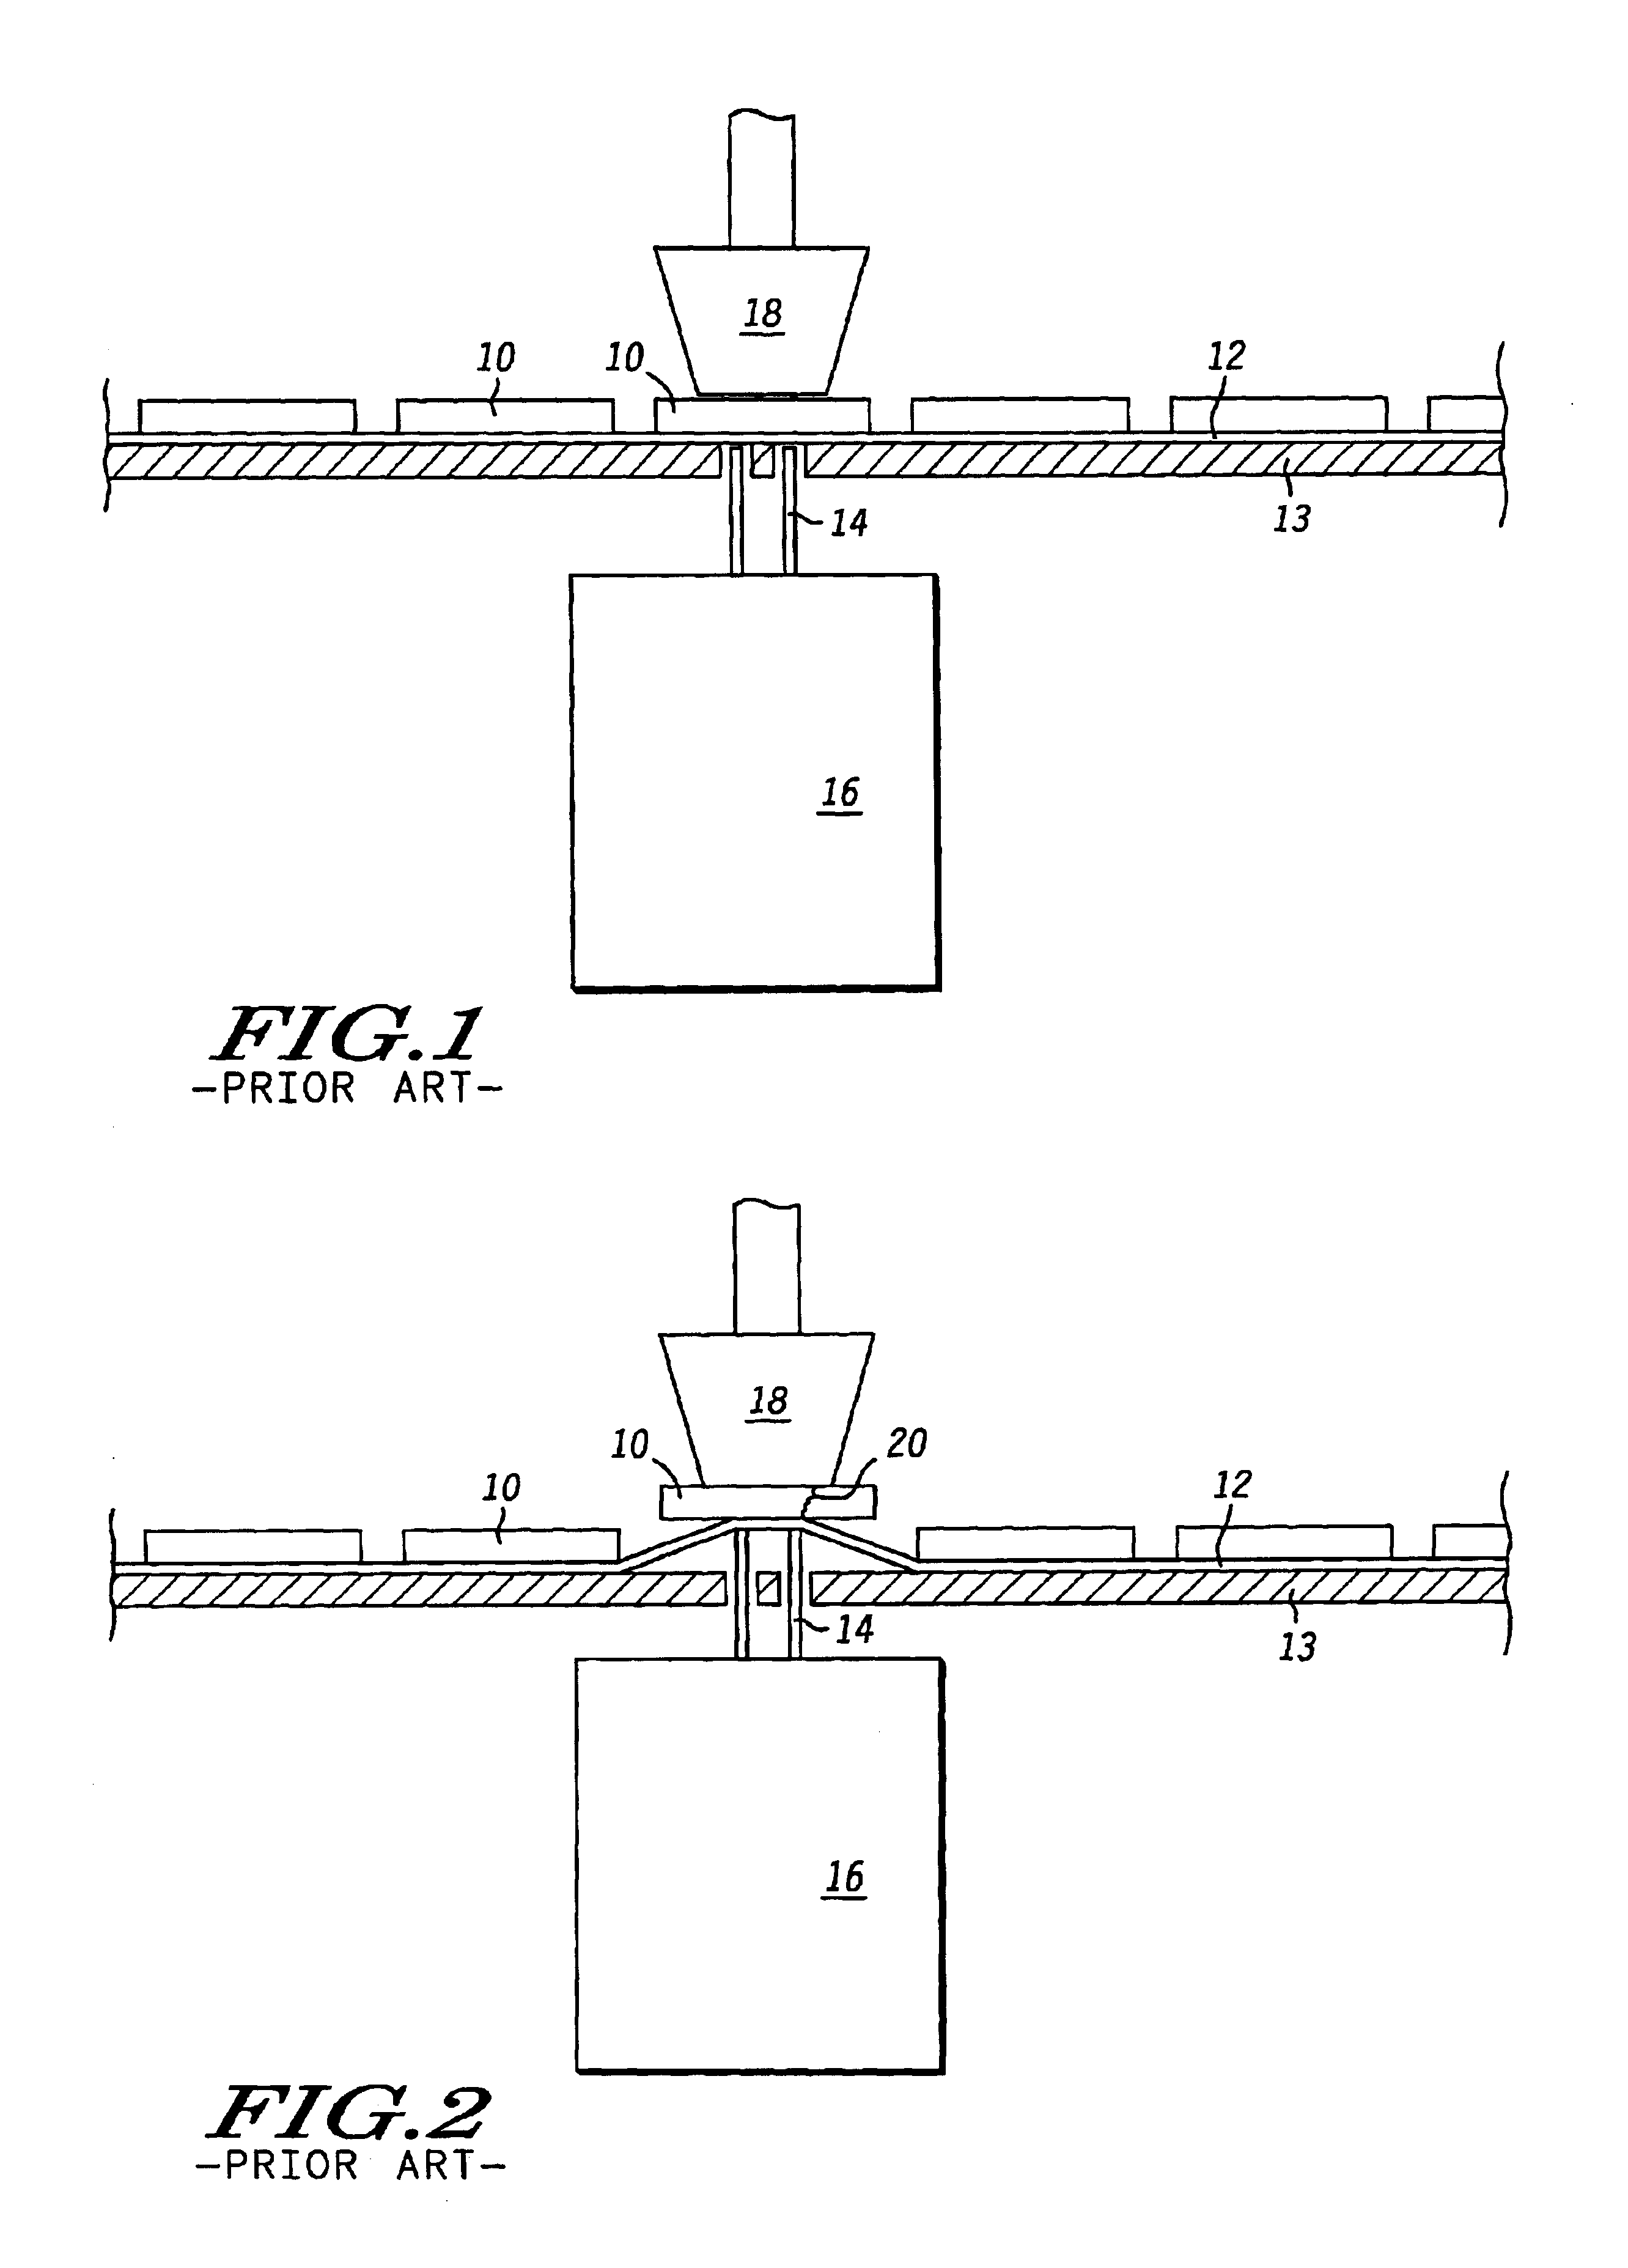 Process for disengaging semiconductor die from an adhesive film